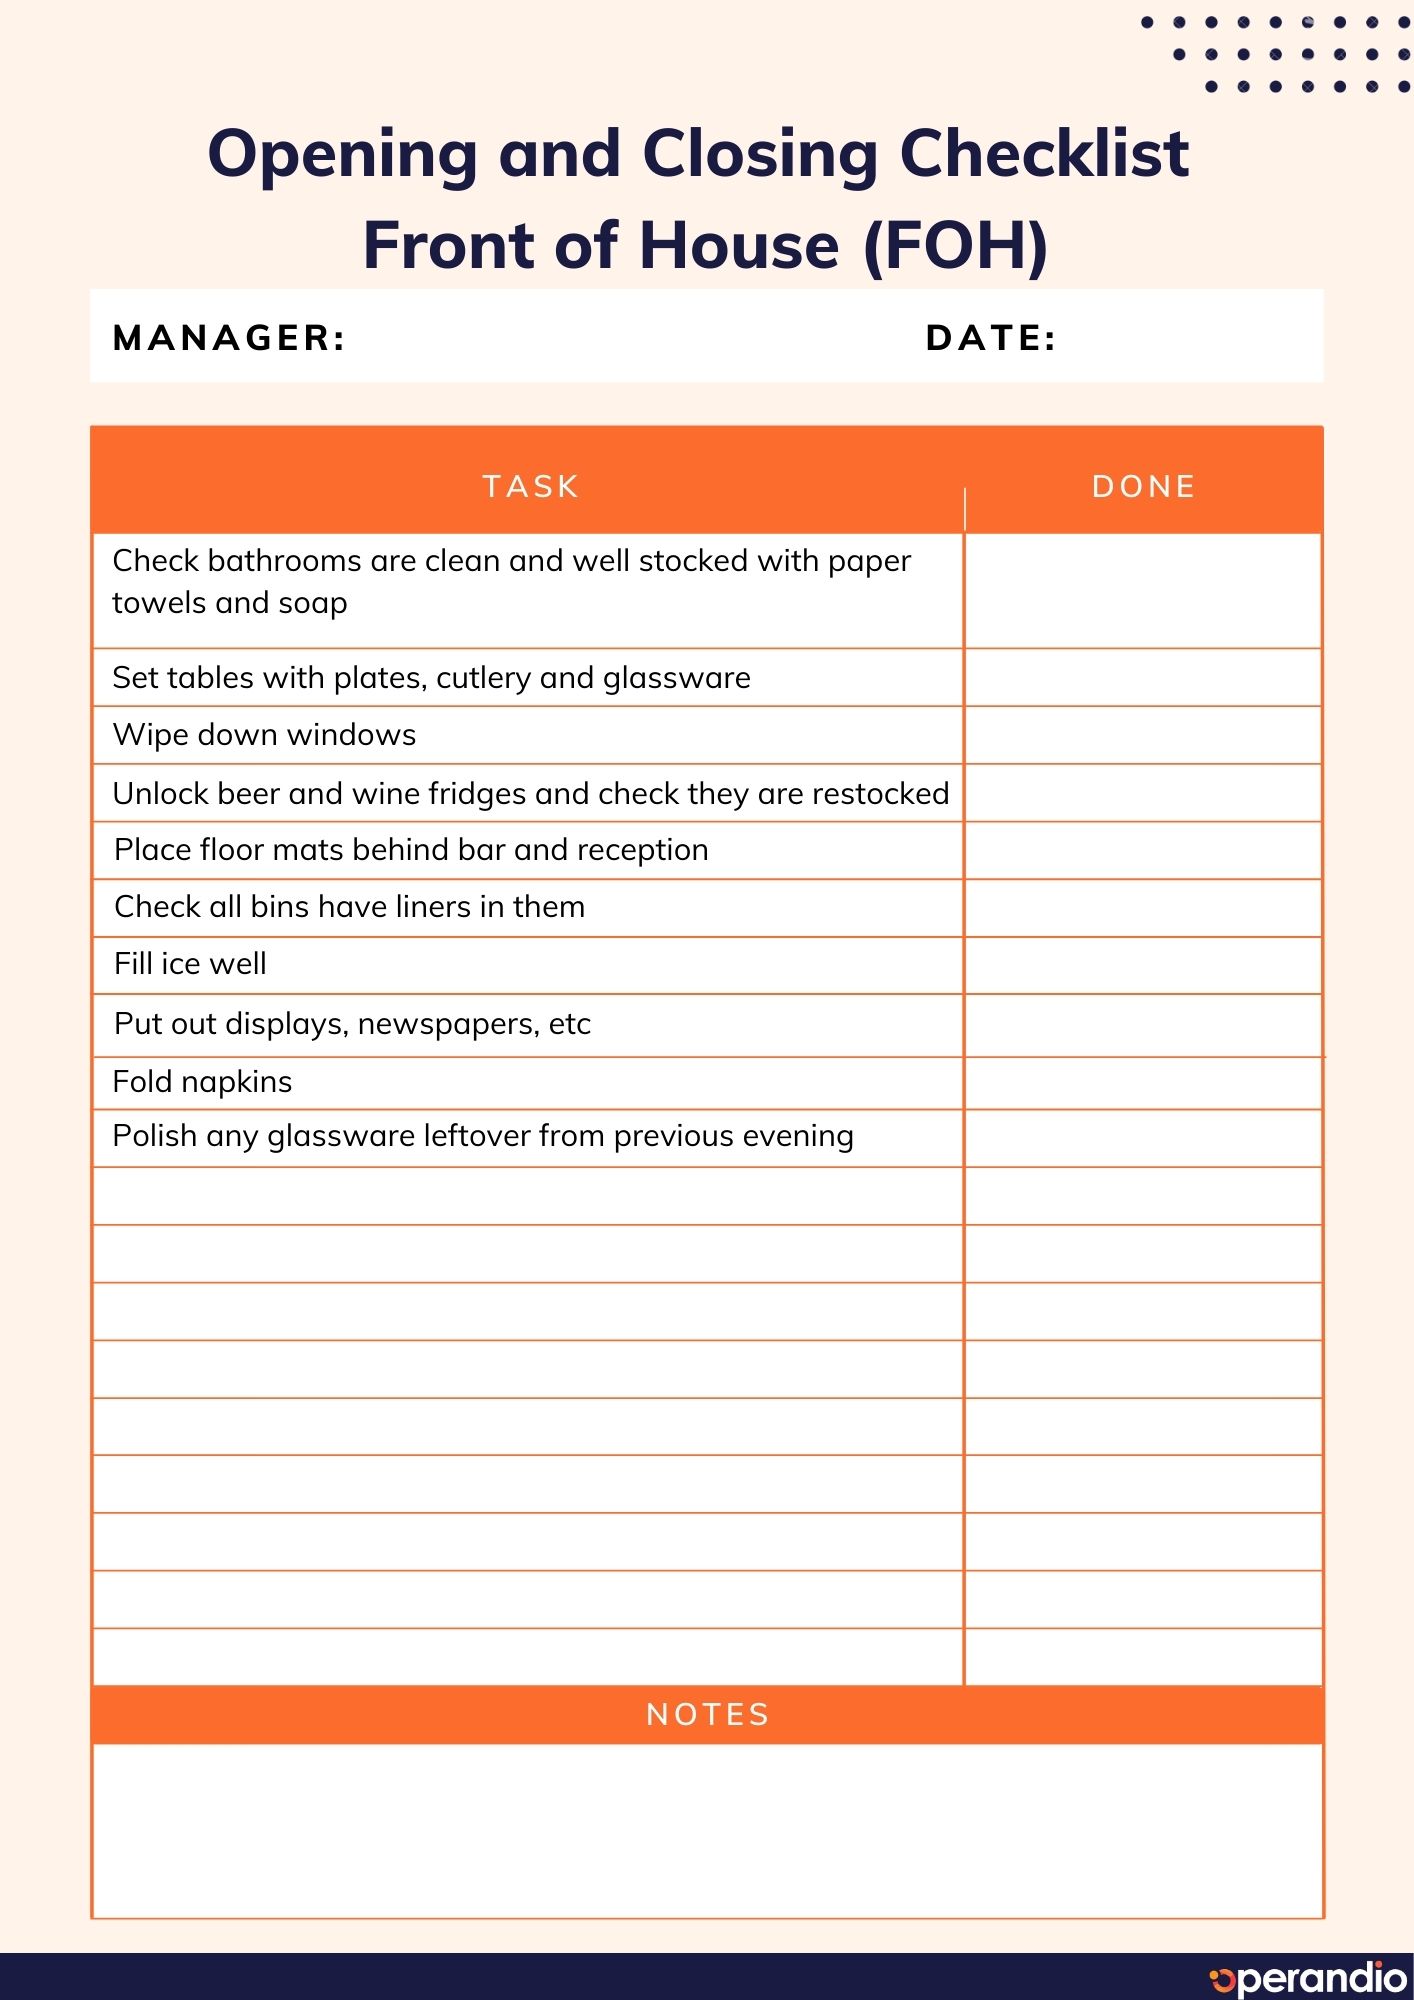 Opening And Closing Checklist Template FREE Restaurant Bar Retail 